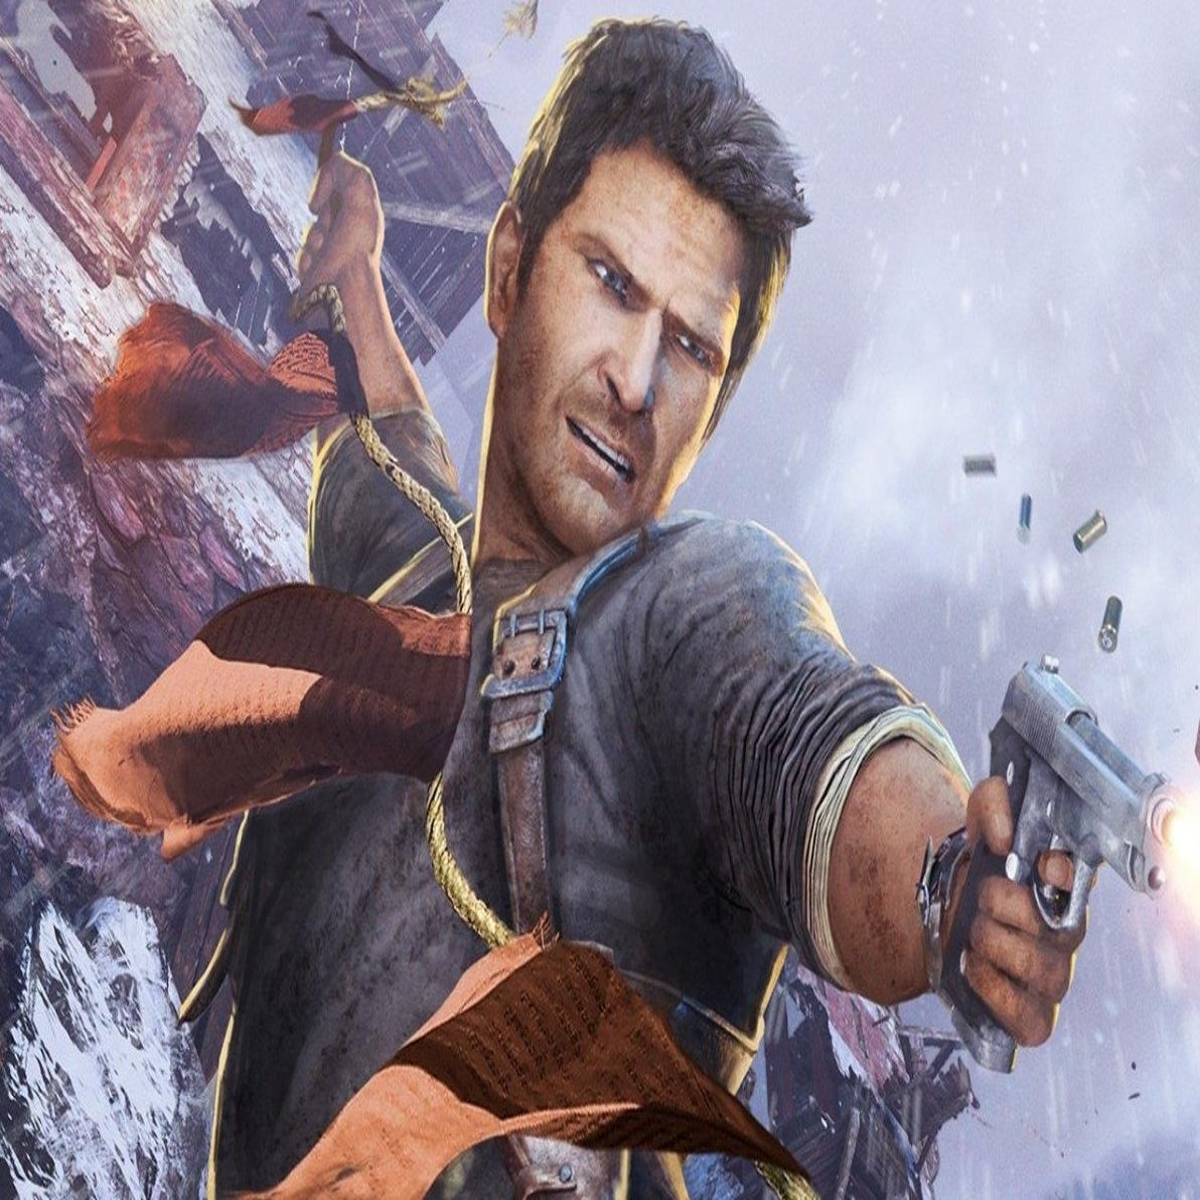 Nathan Drake questions his treasure's worth in new Uncharted 4